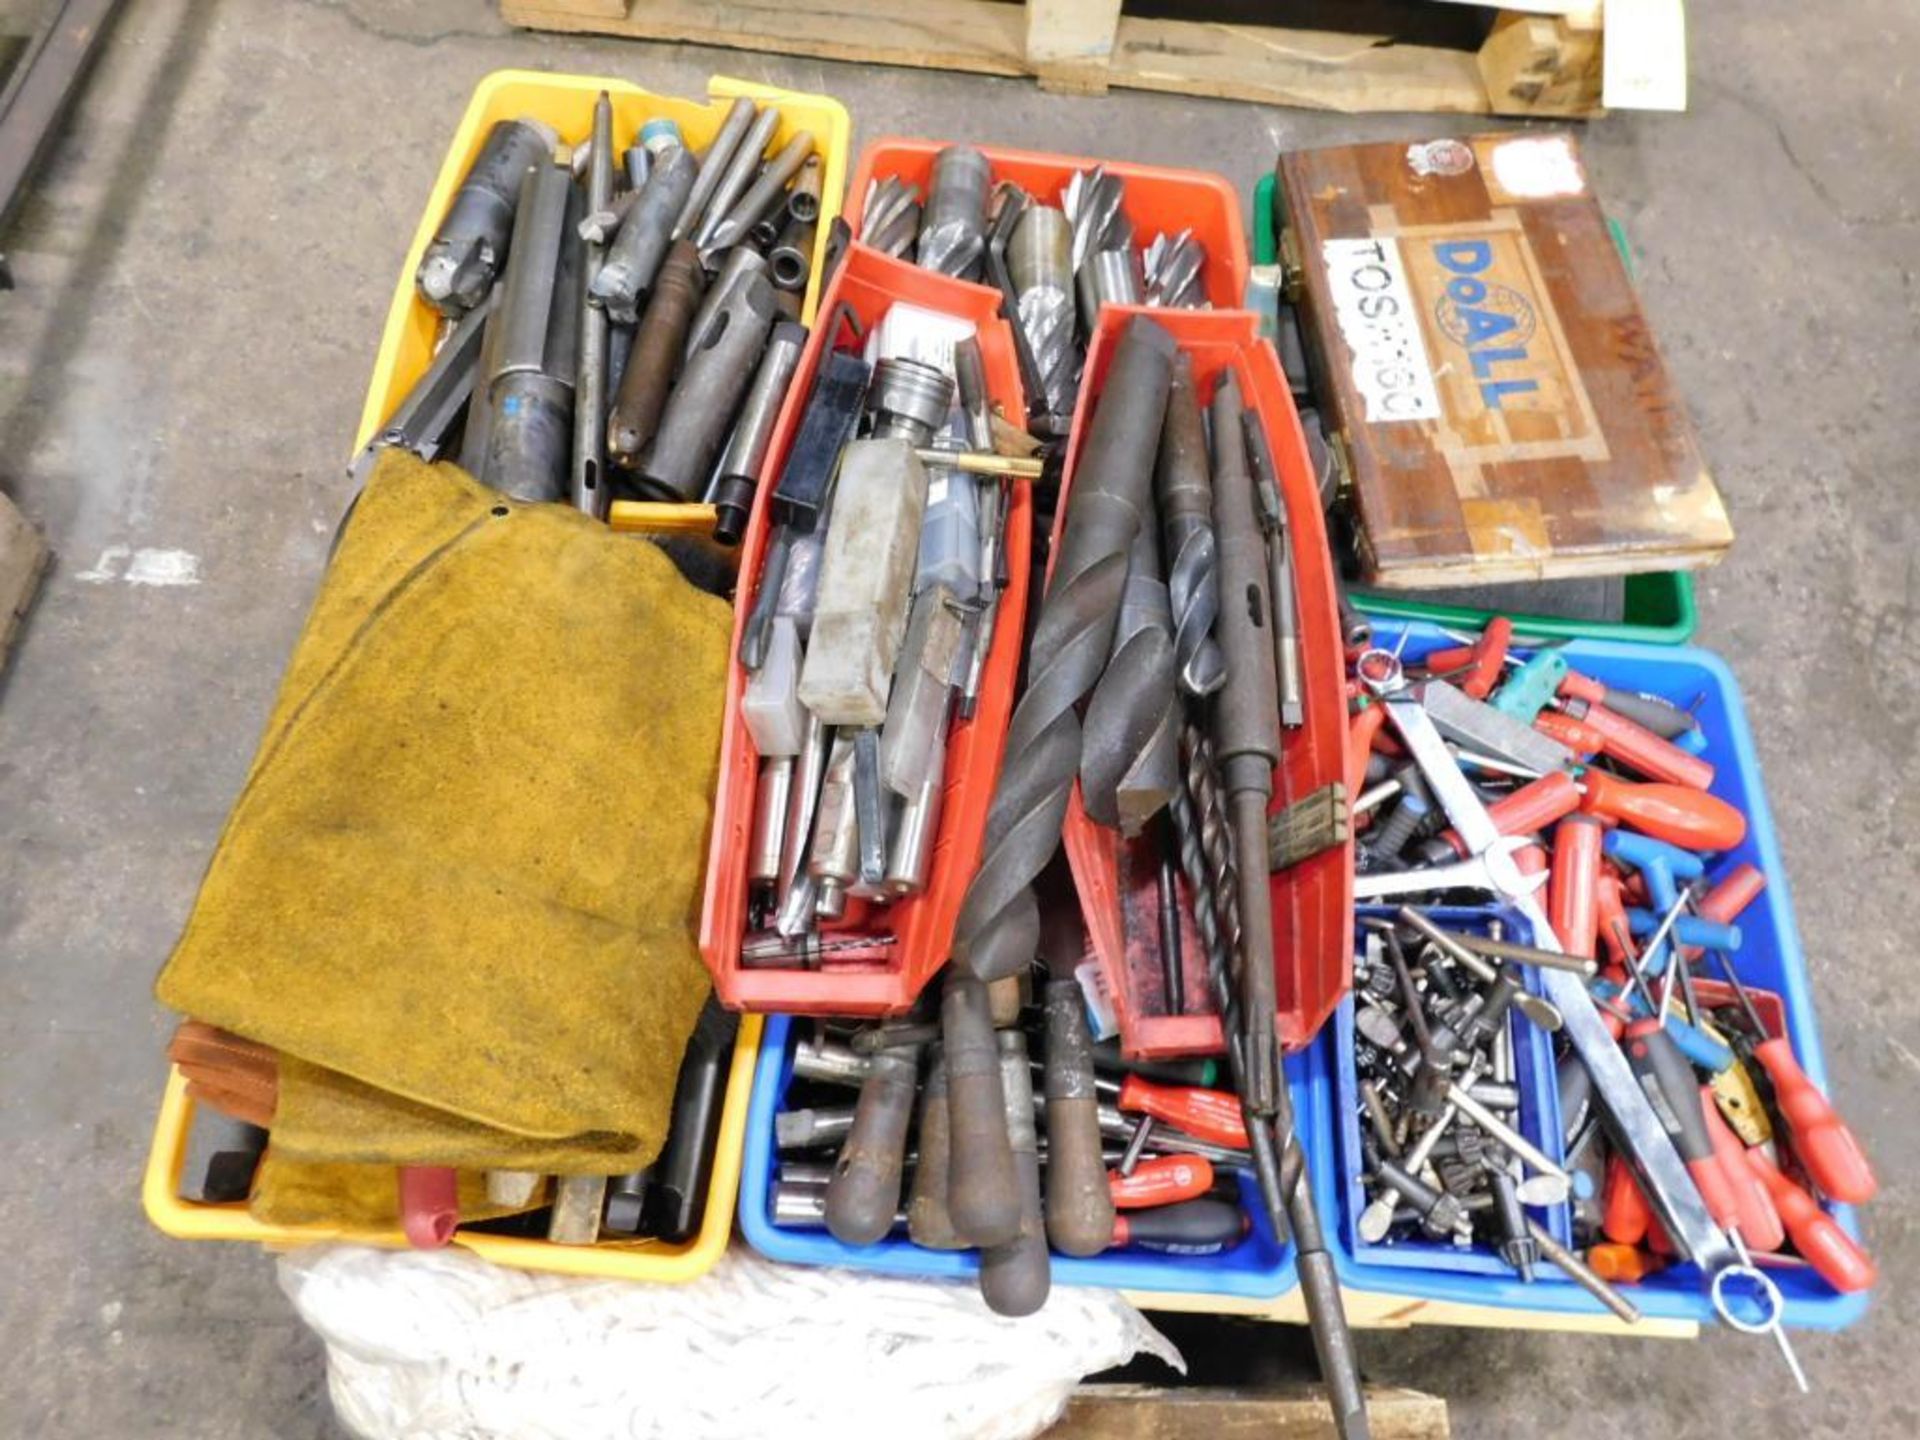 LOT: Assorted Large Roughing Endmills, Taps, Spade Drills, Taper Shank Drill Bits, Chuck Keys, Wrenc - Image 6 of 6